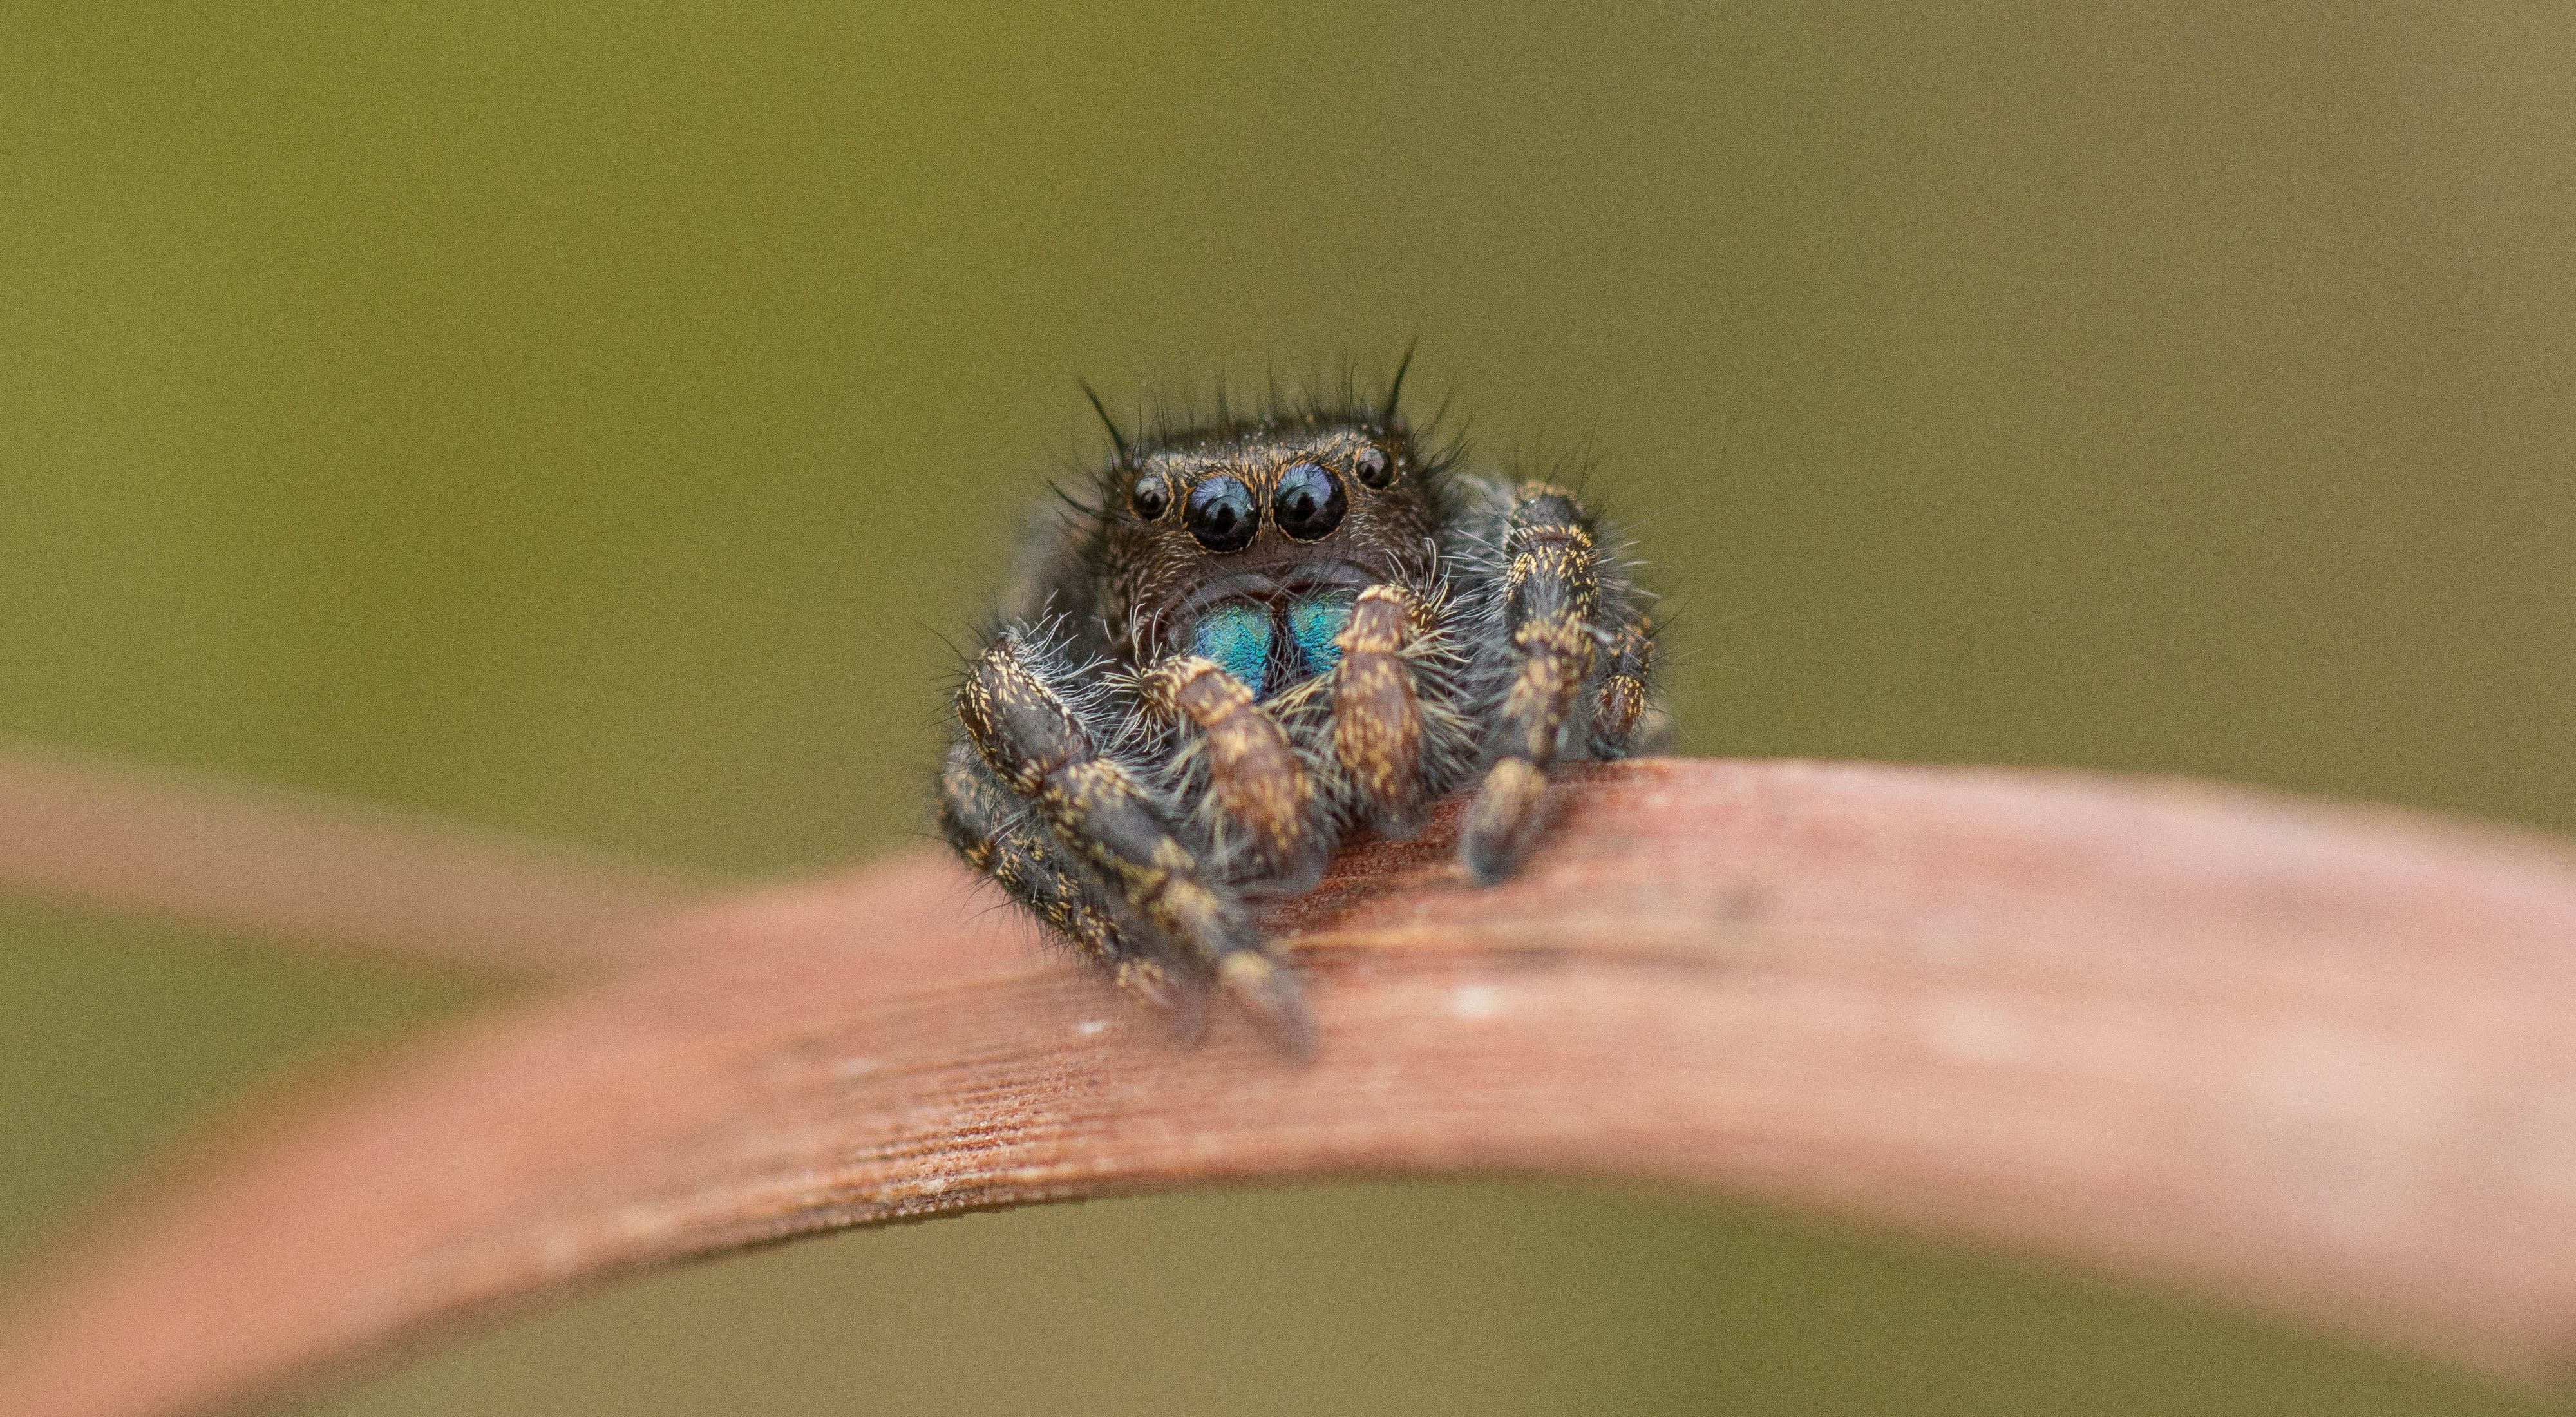 A close up of a jumping spider.